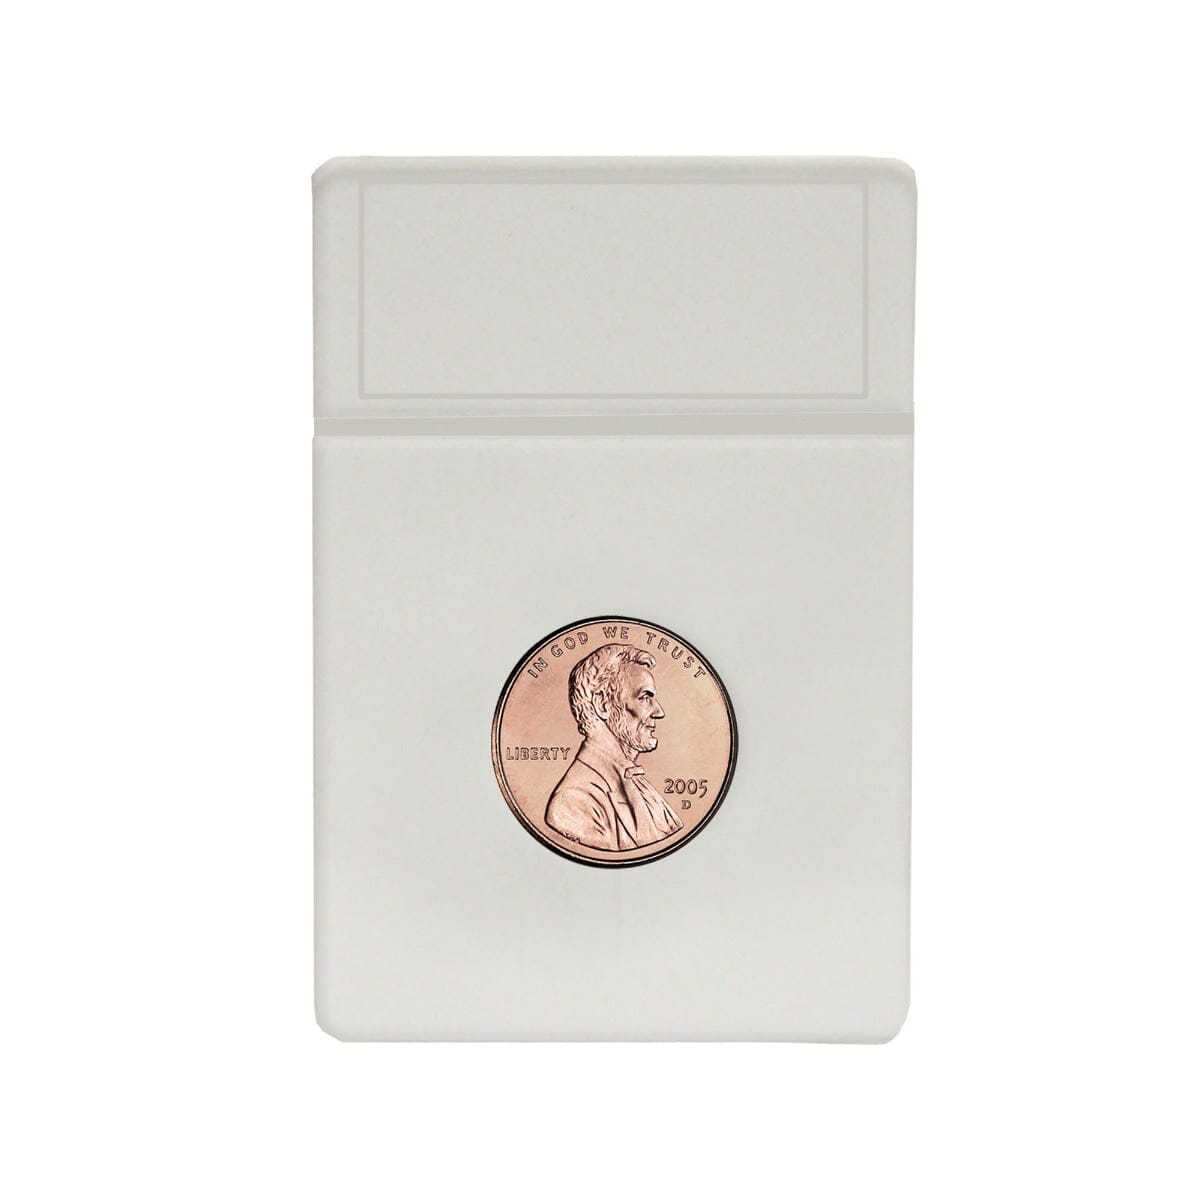 White Coin Display Slab Inserts - 7 Sizes Available